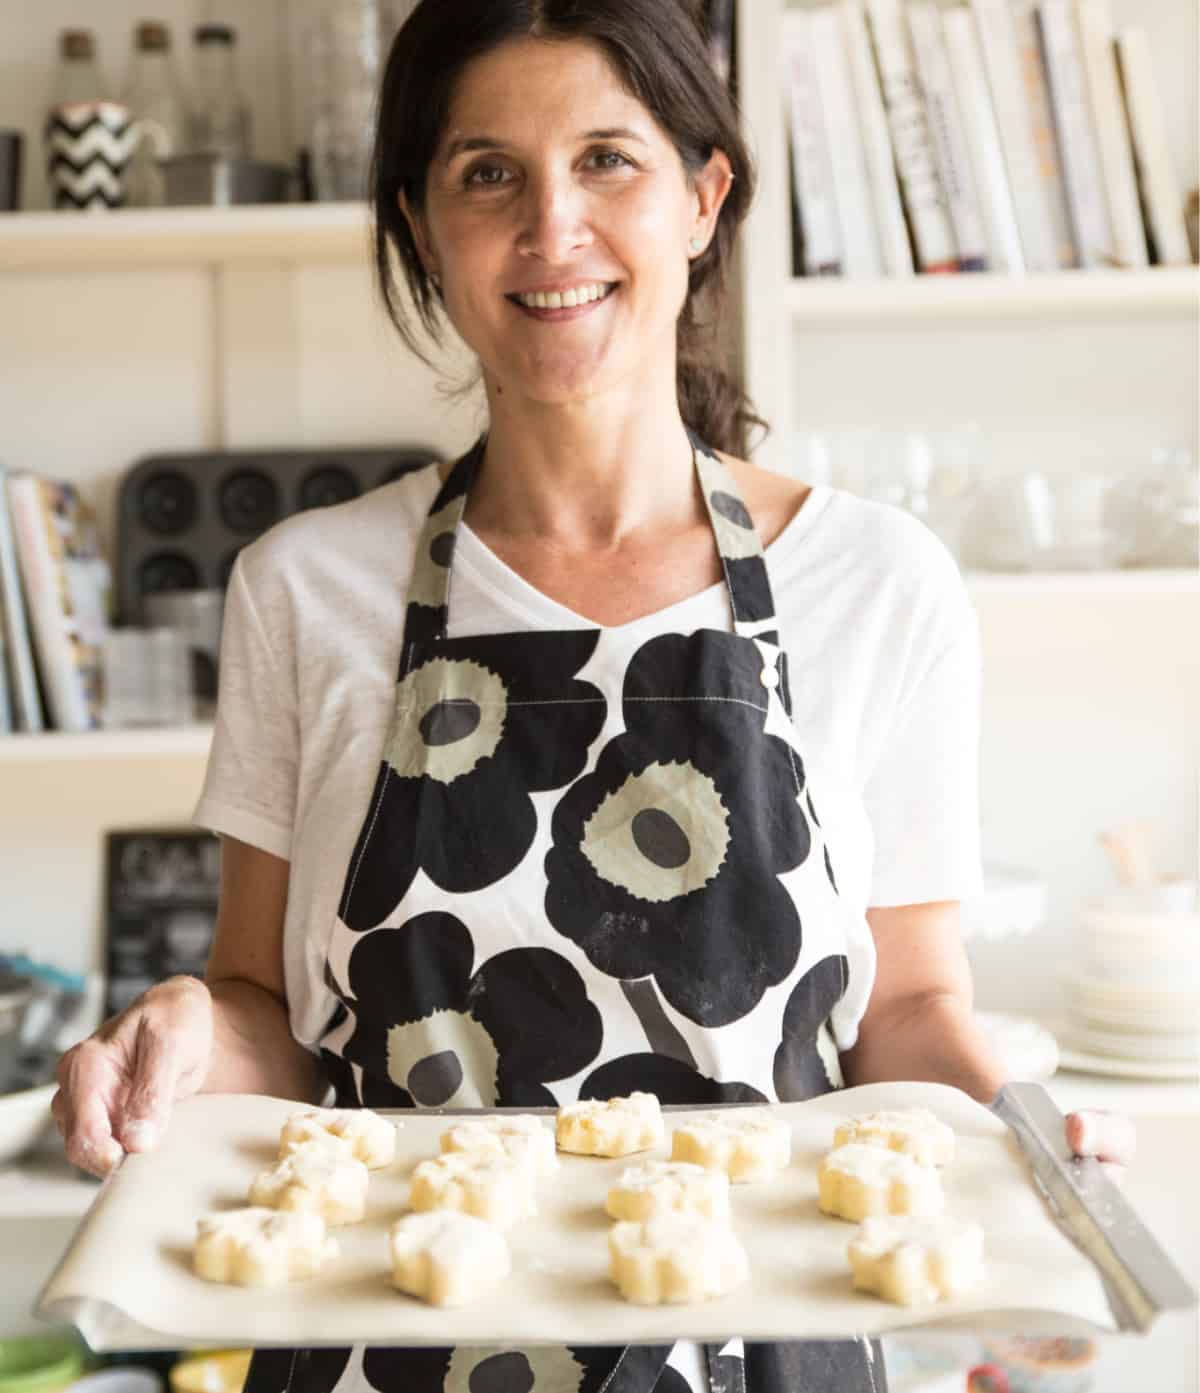 Person with apron and tray of scones